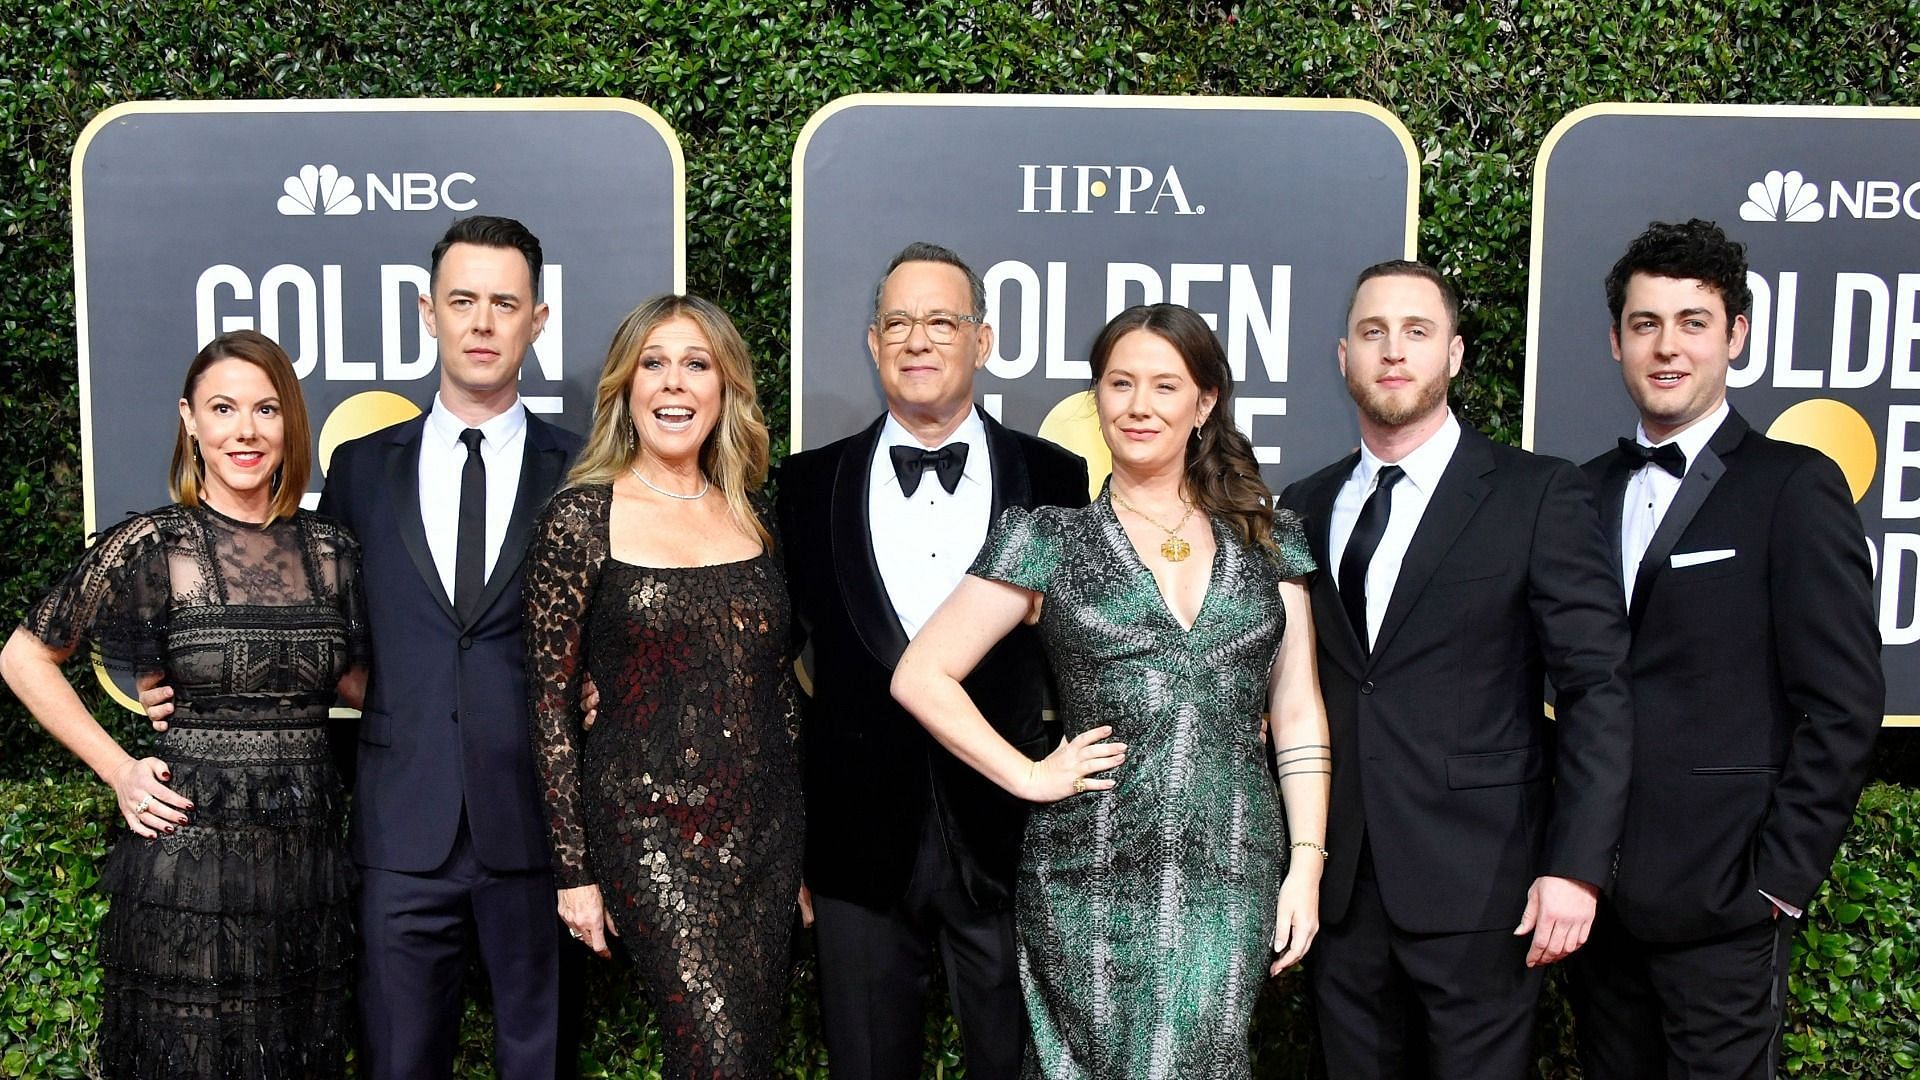 Tom Hanks with his family (Image via Frazer Harrison/Getty Images)